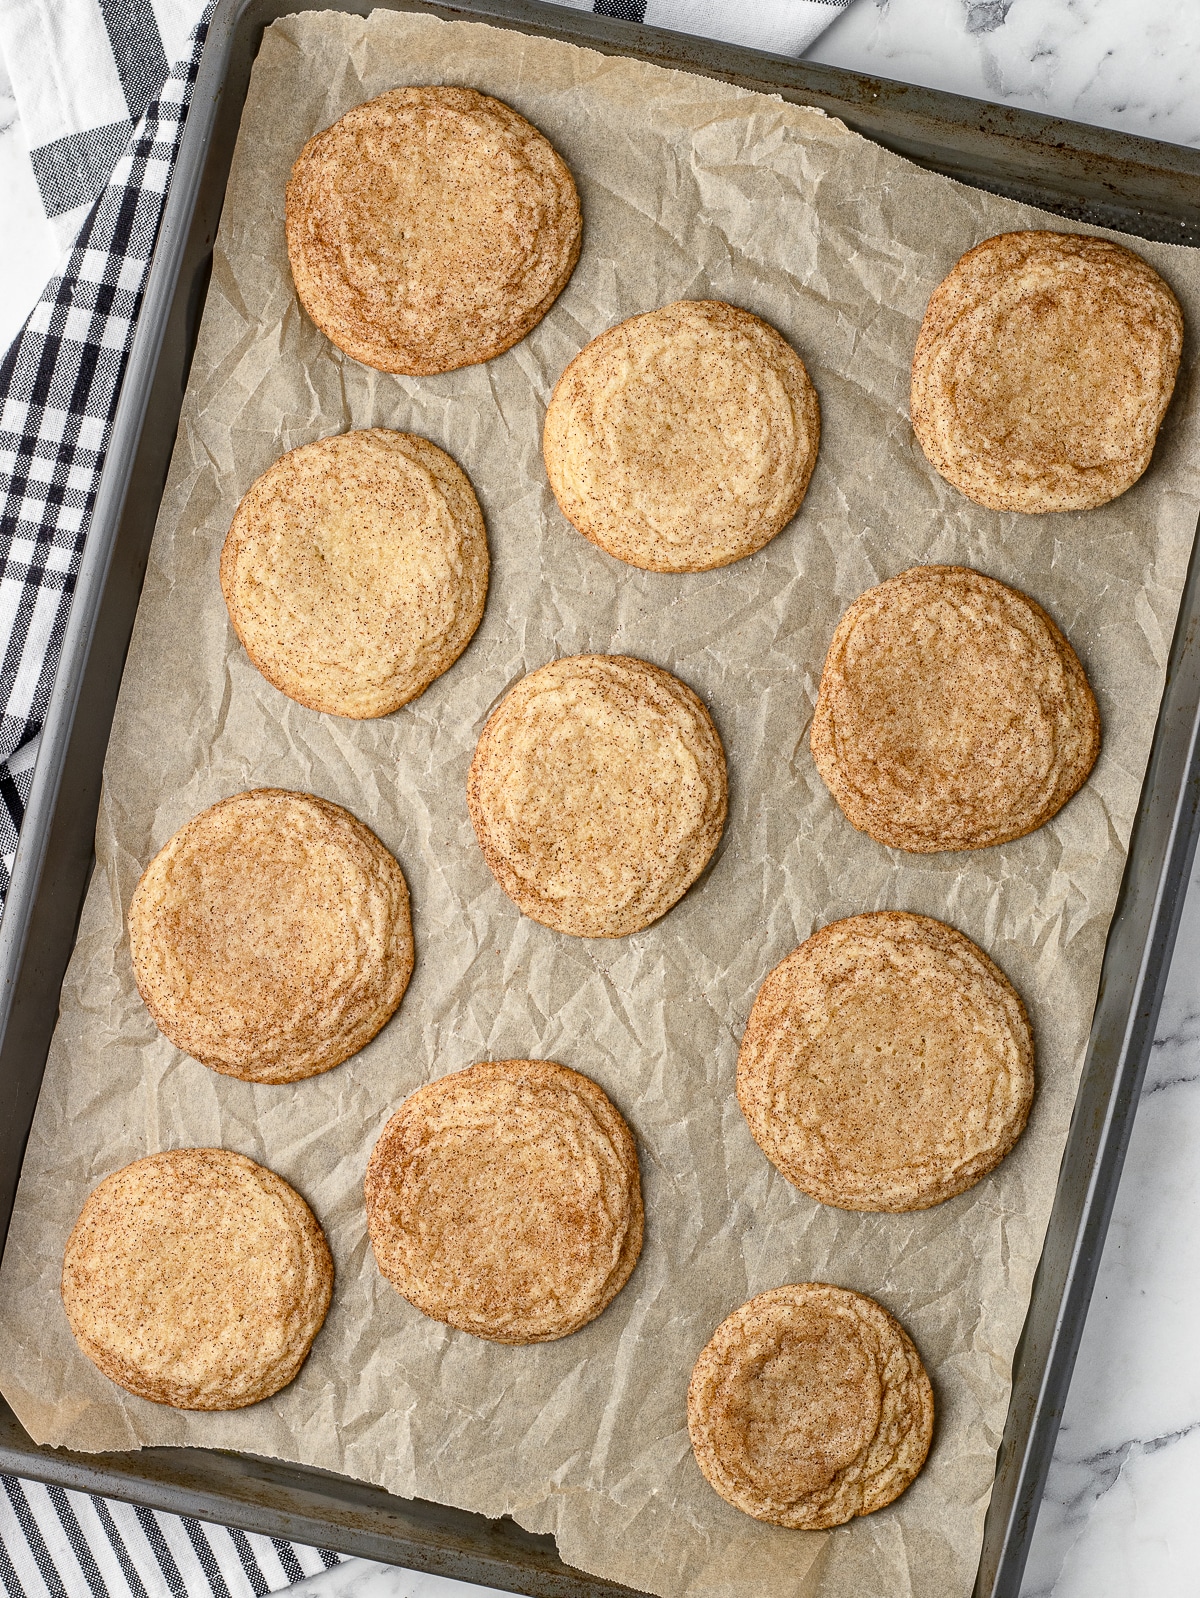 Snickerdoodles on a parchment lined baking sheet after they have been baked.